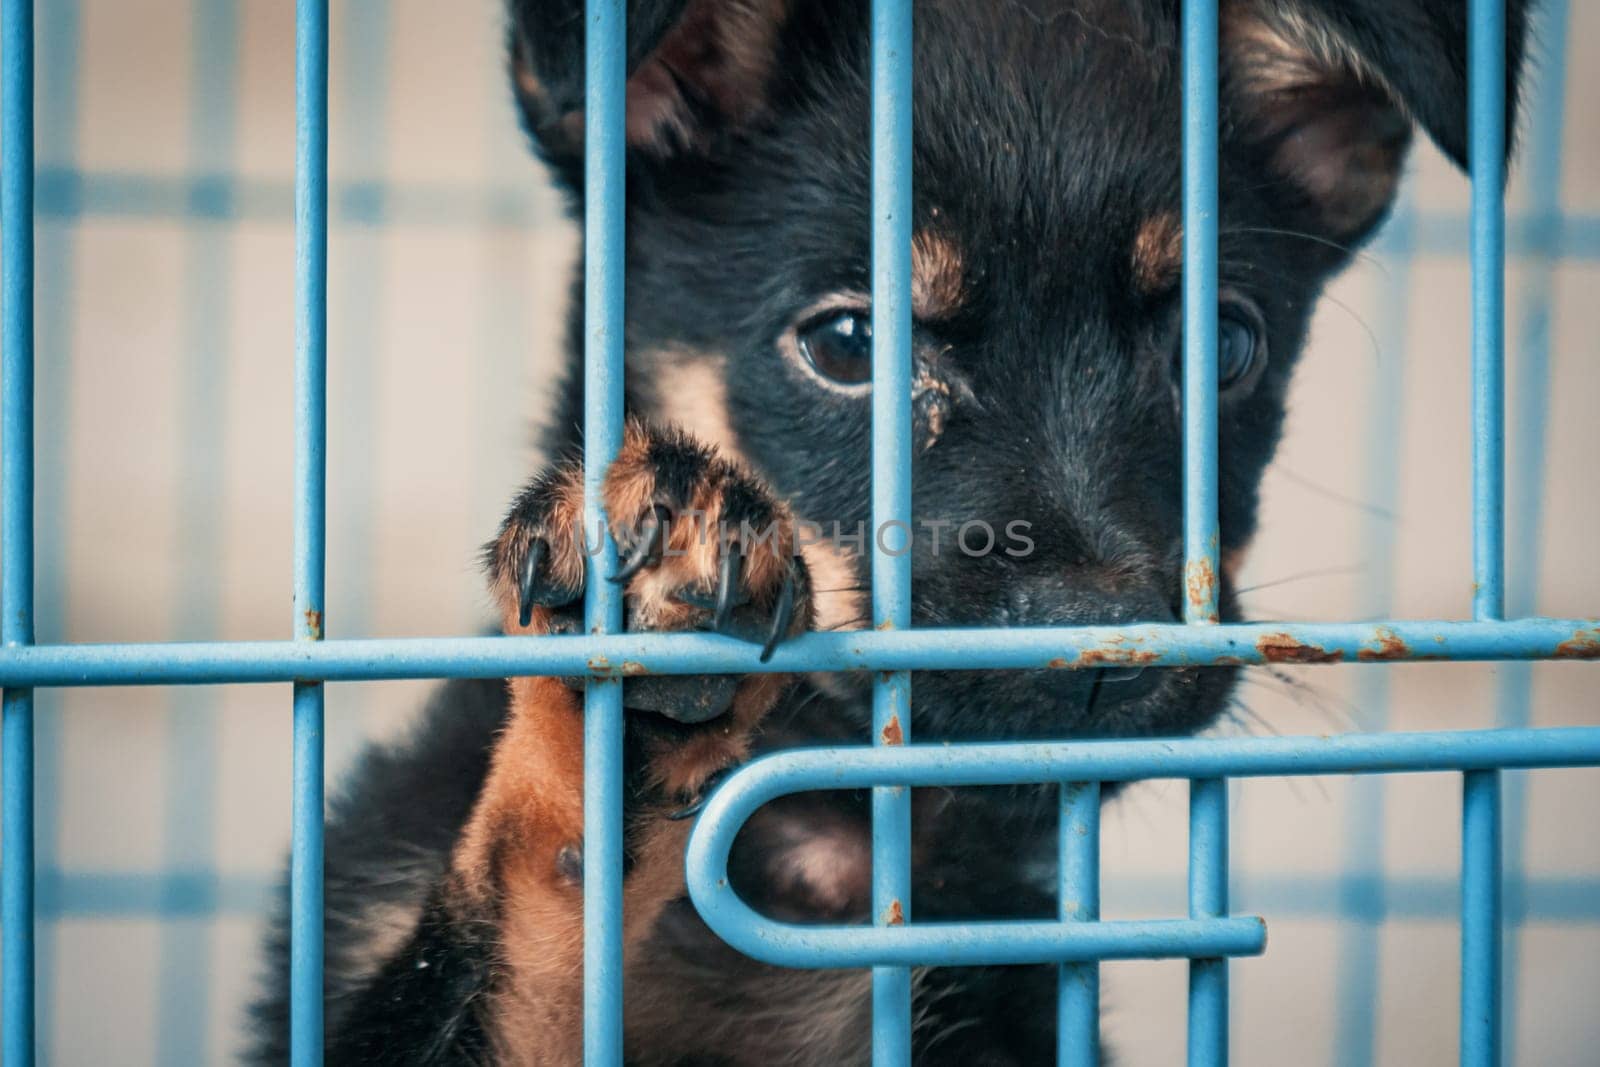 Sad puppy in shelter behind fence waiting to be rescued and adopted to new home. Shelter for animals concept by Busker